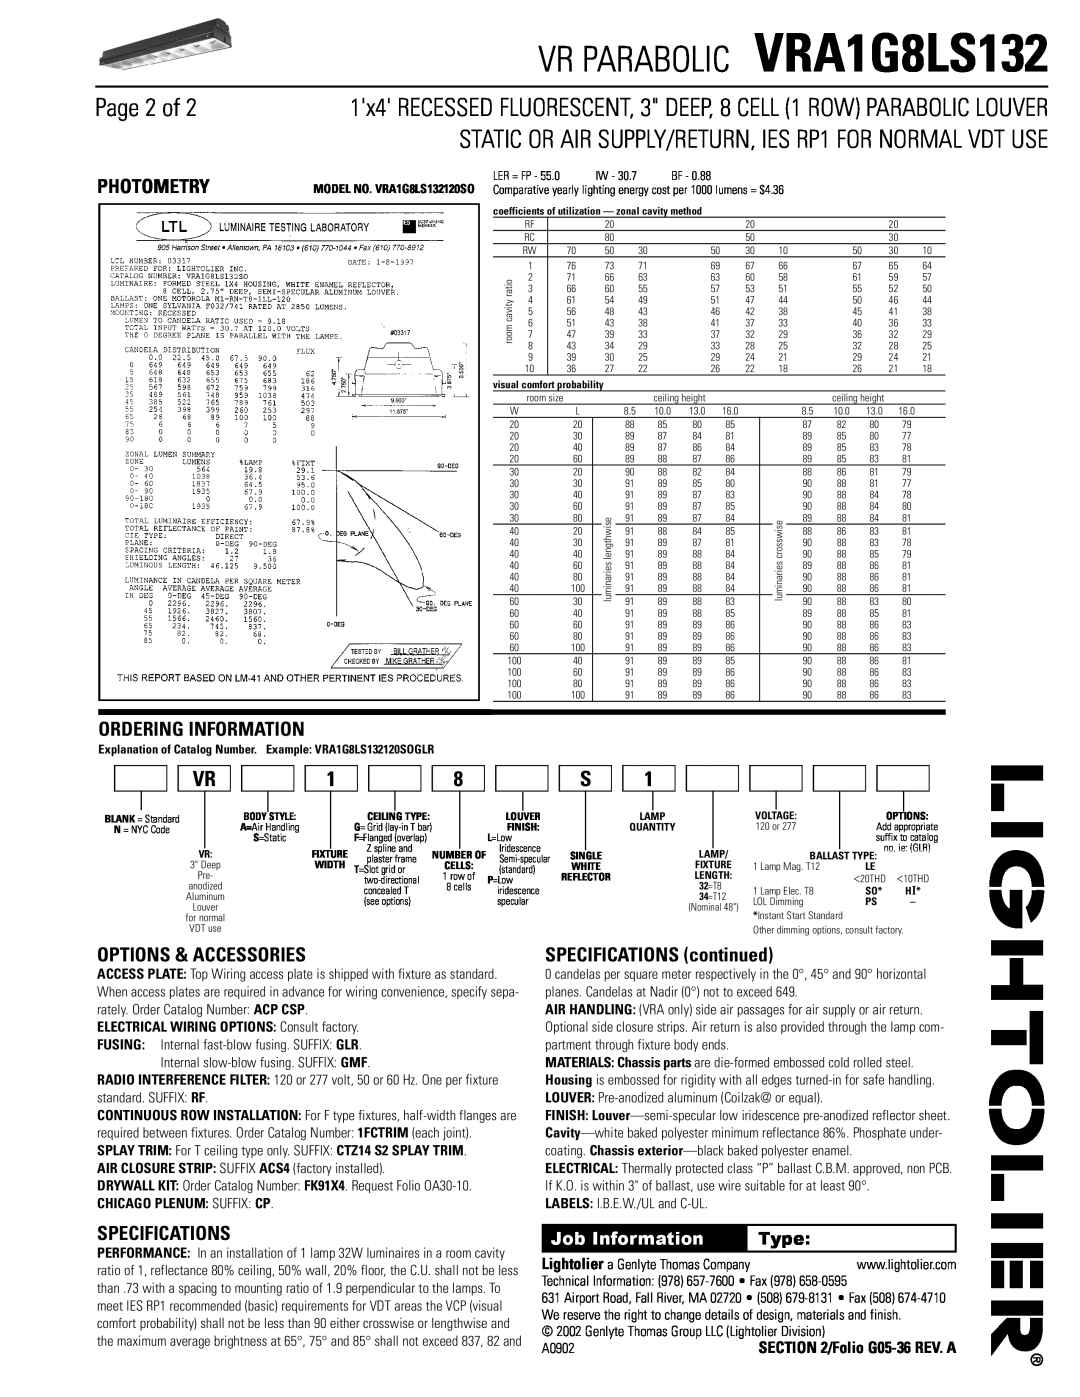 Lightolier VRA1G8LS132 Page 2 of, Photometry, Ordering Information, Options & Accessories, Specifications, Job Information 